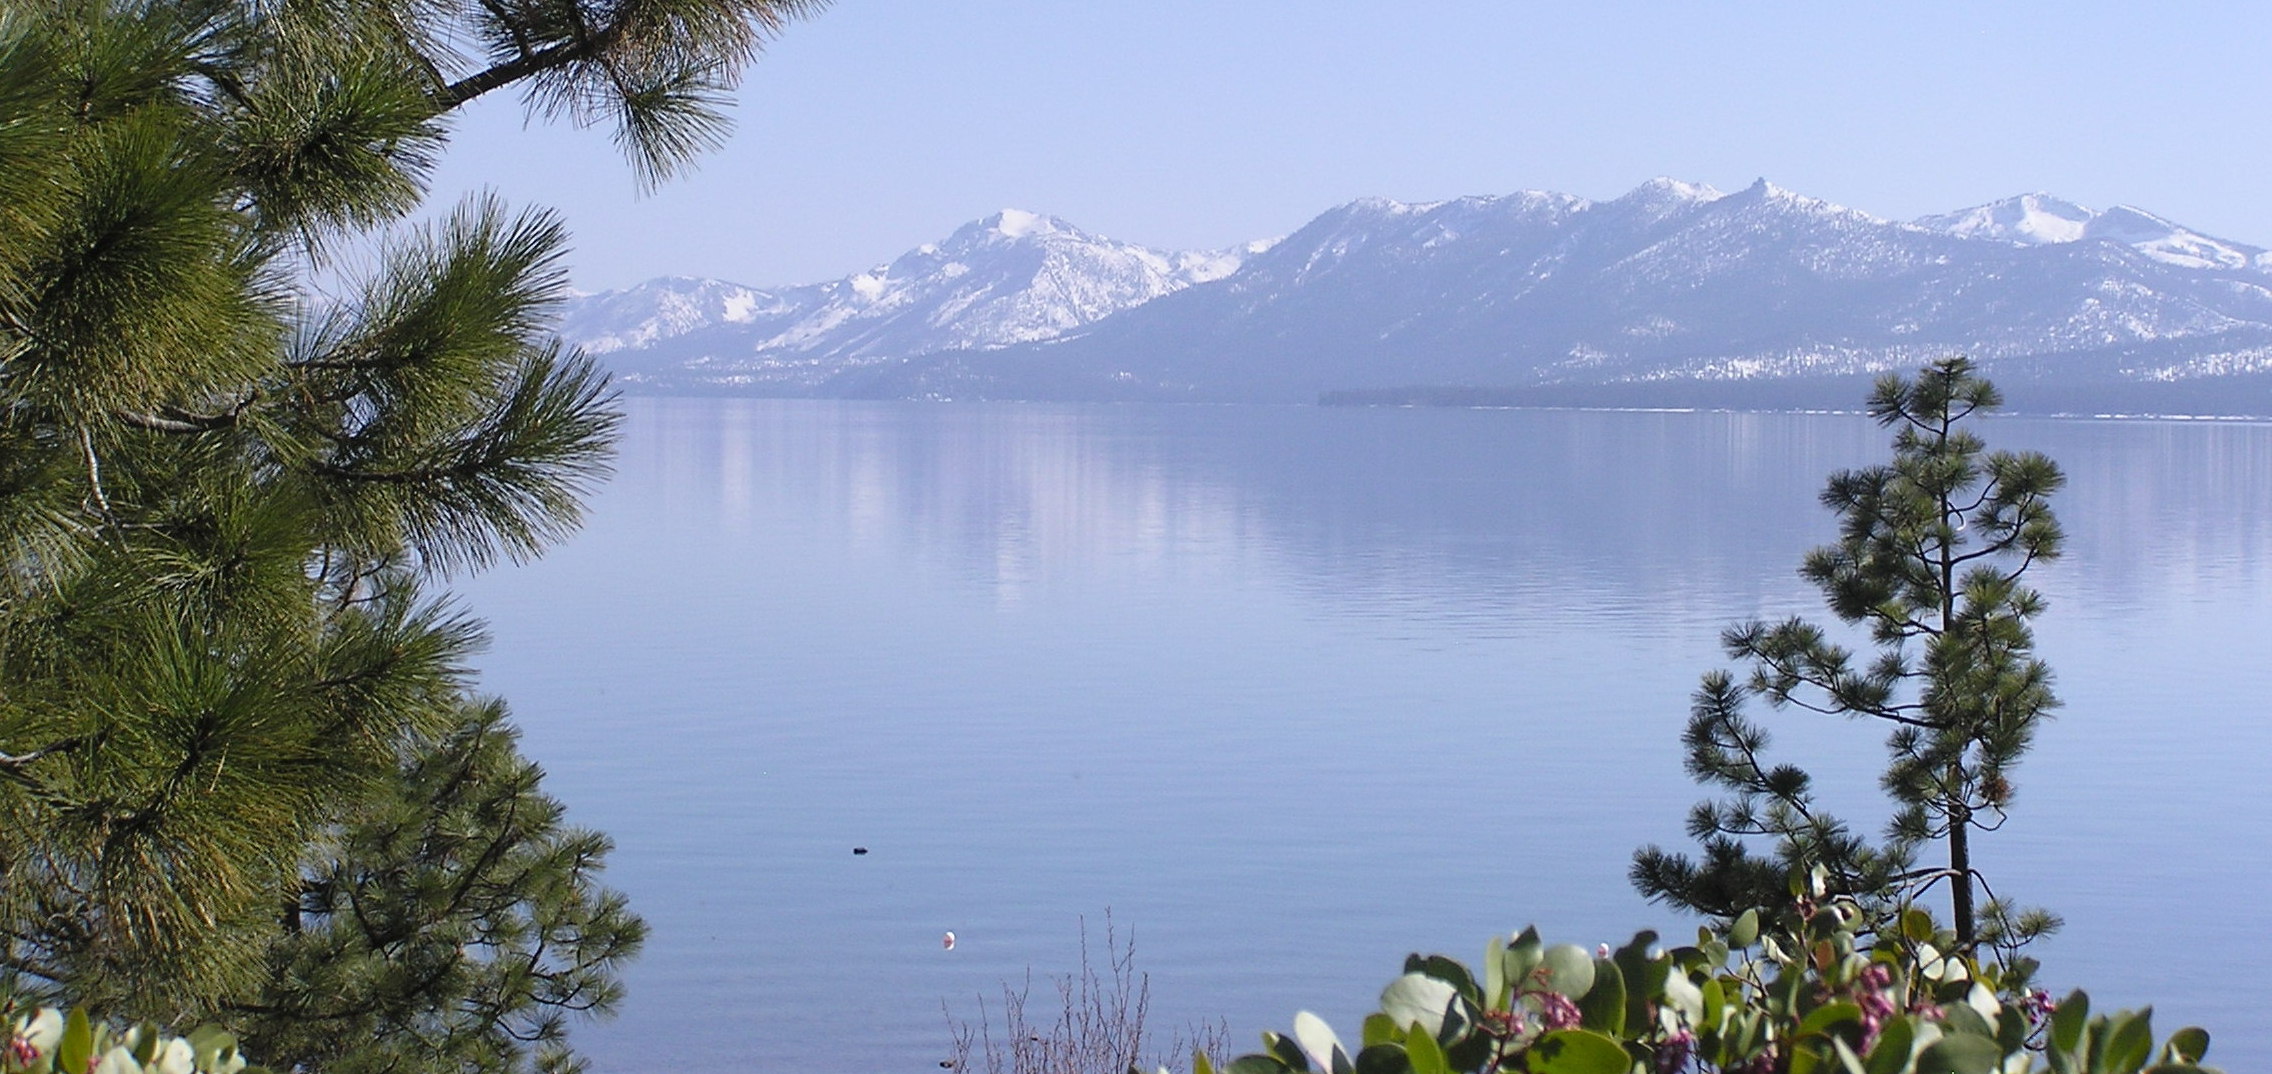 Stunning Lake Tahoe with its snow-covered Sierra Mountains reflecting in the lake.